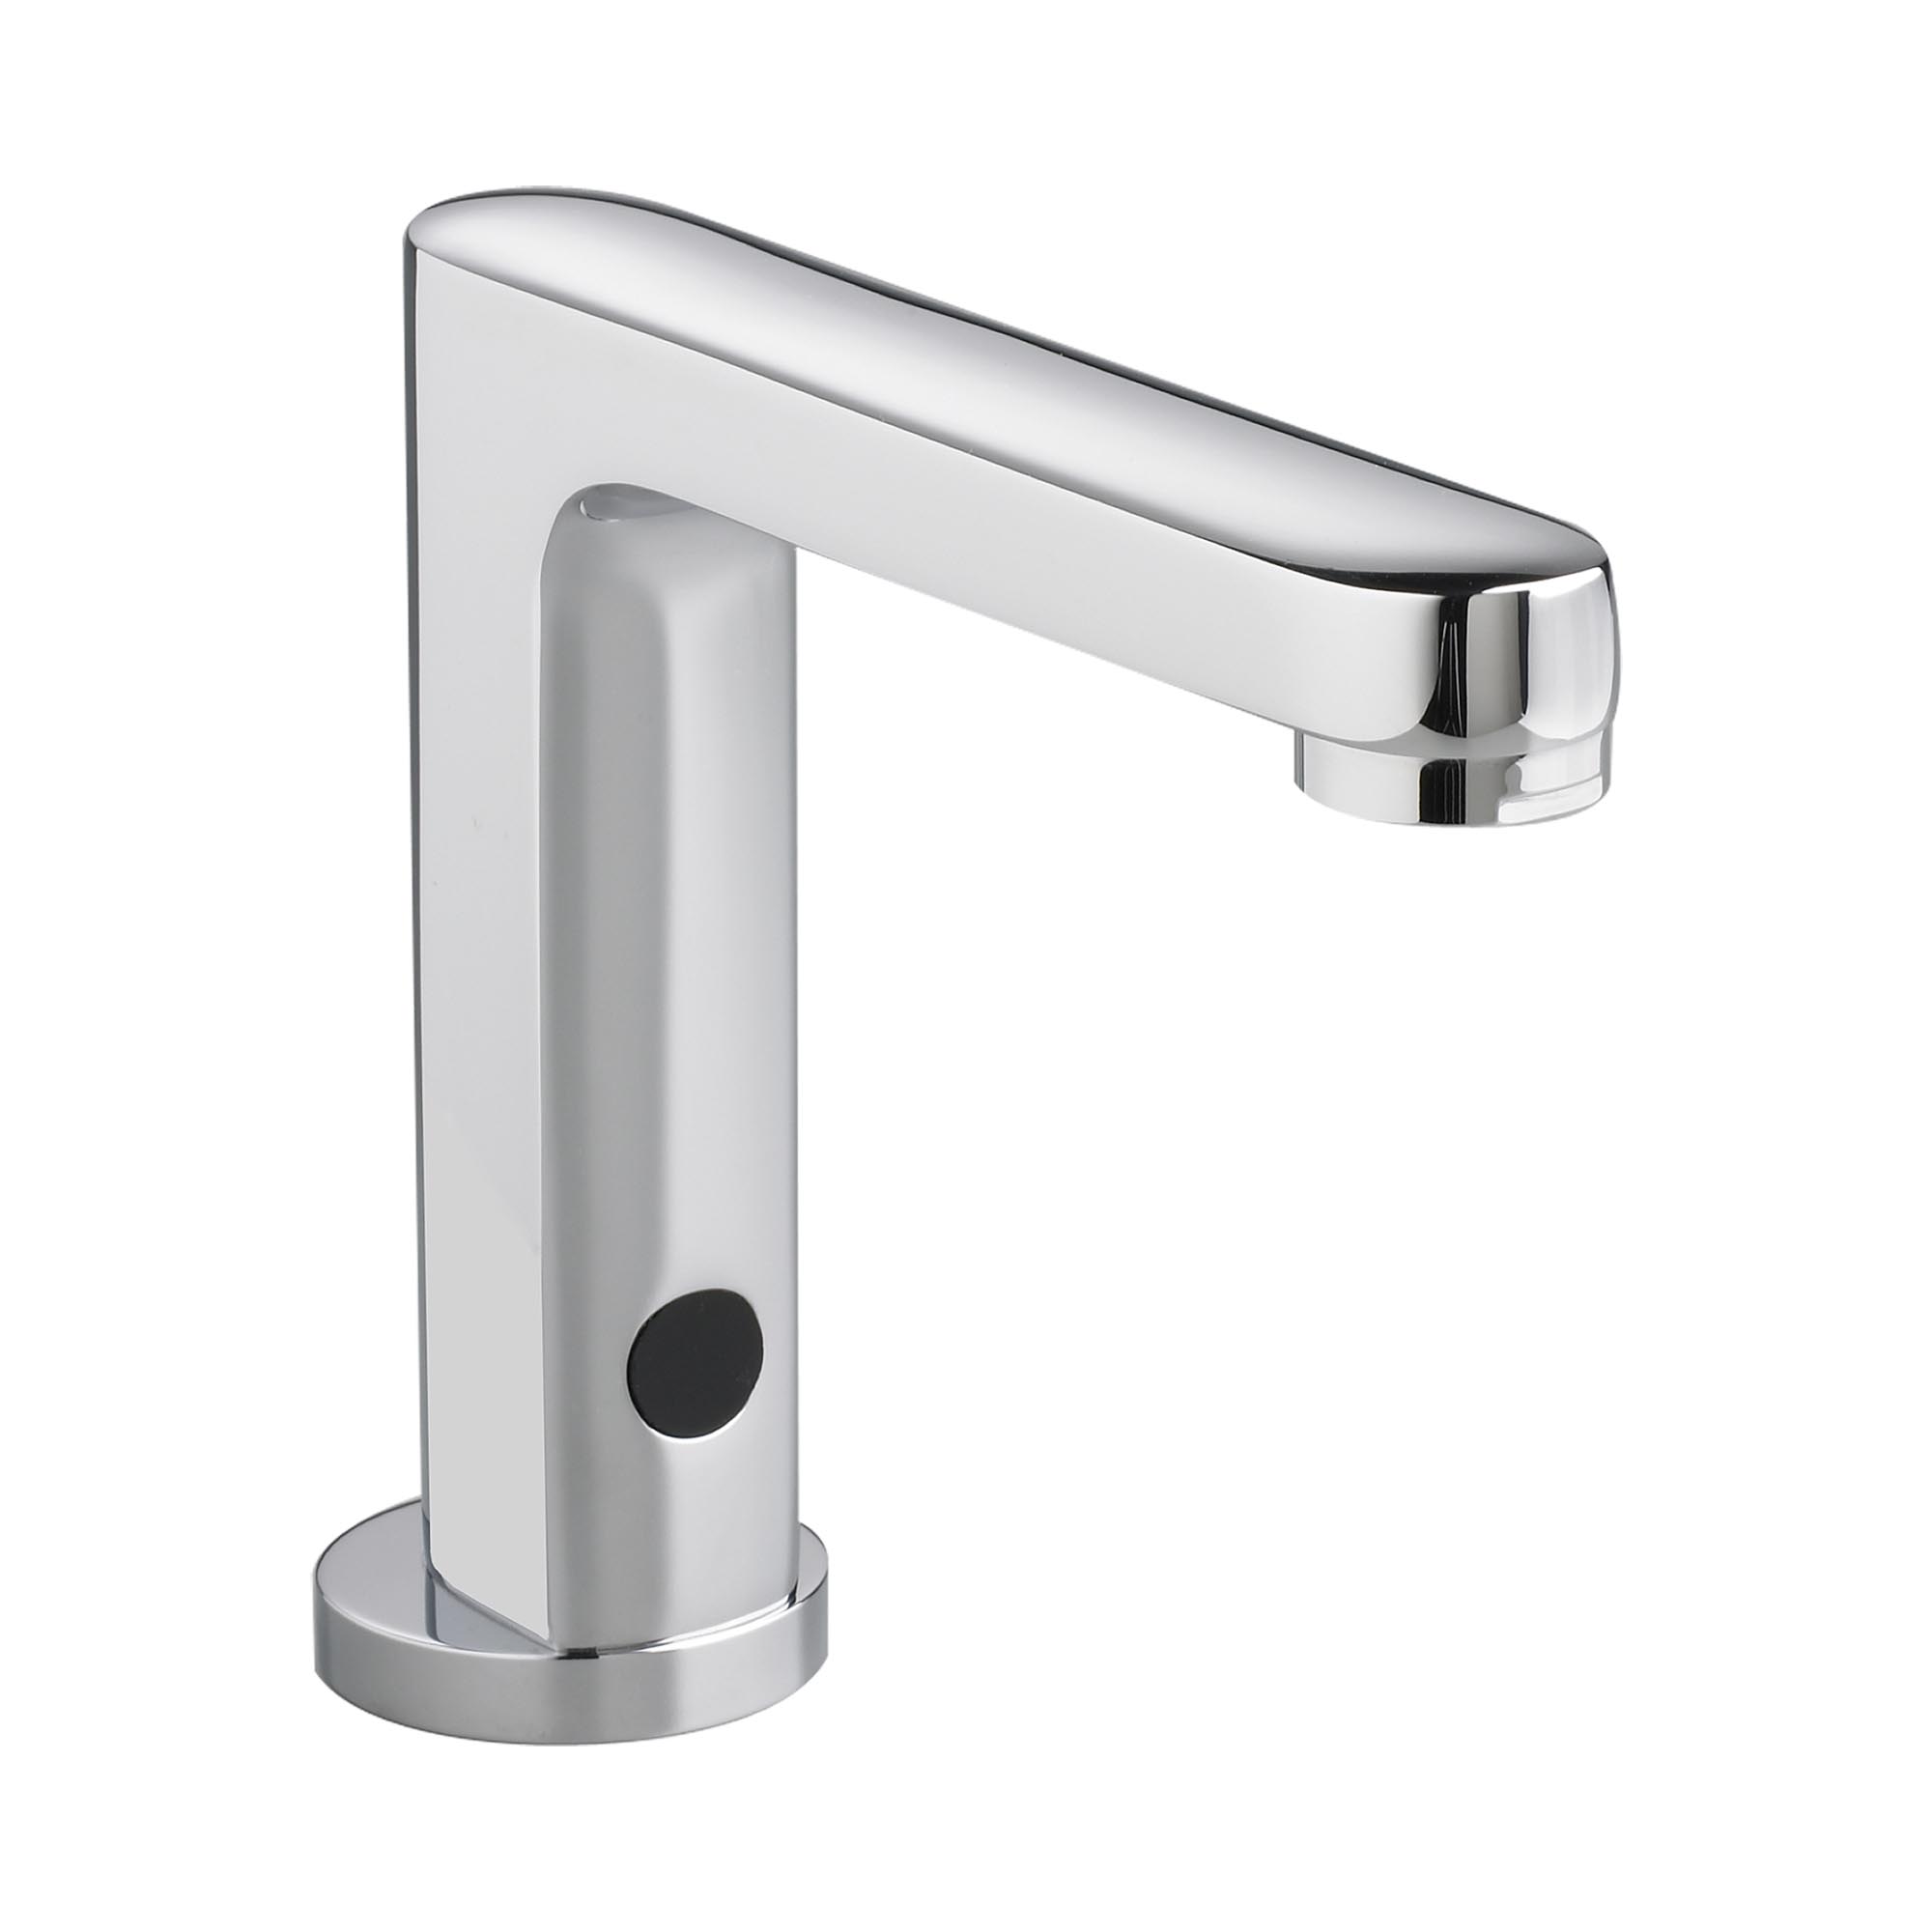 Moments™ Selectronic™ Touchless Faucet, Base Model, 1.5 gpm/5.7 Lpm